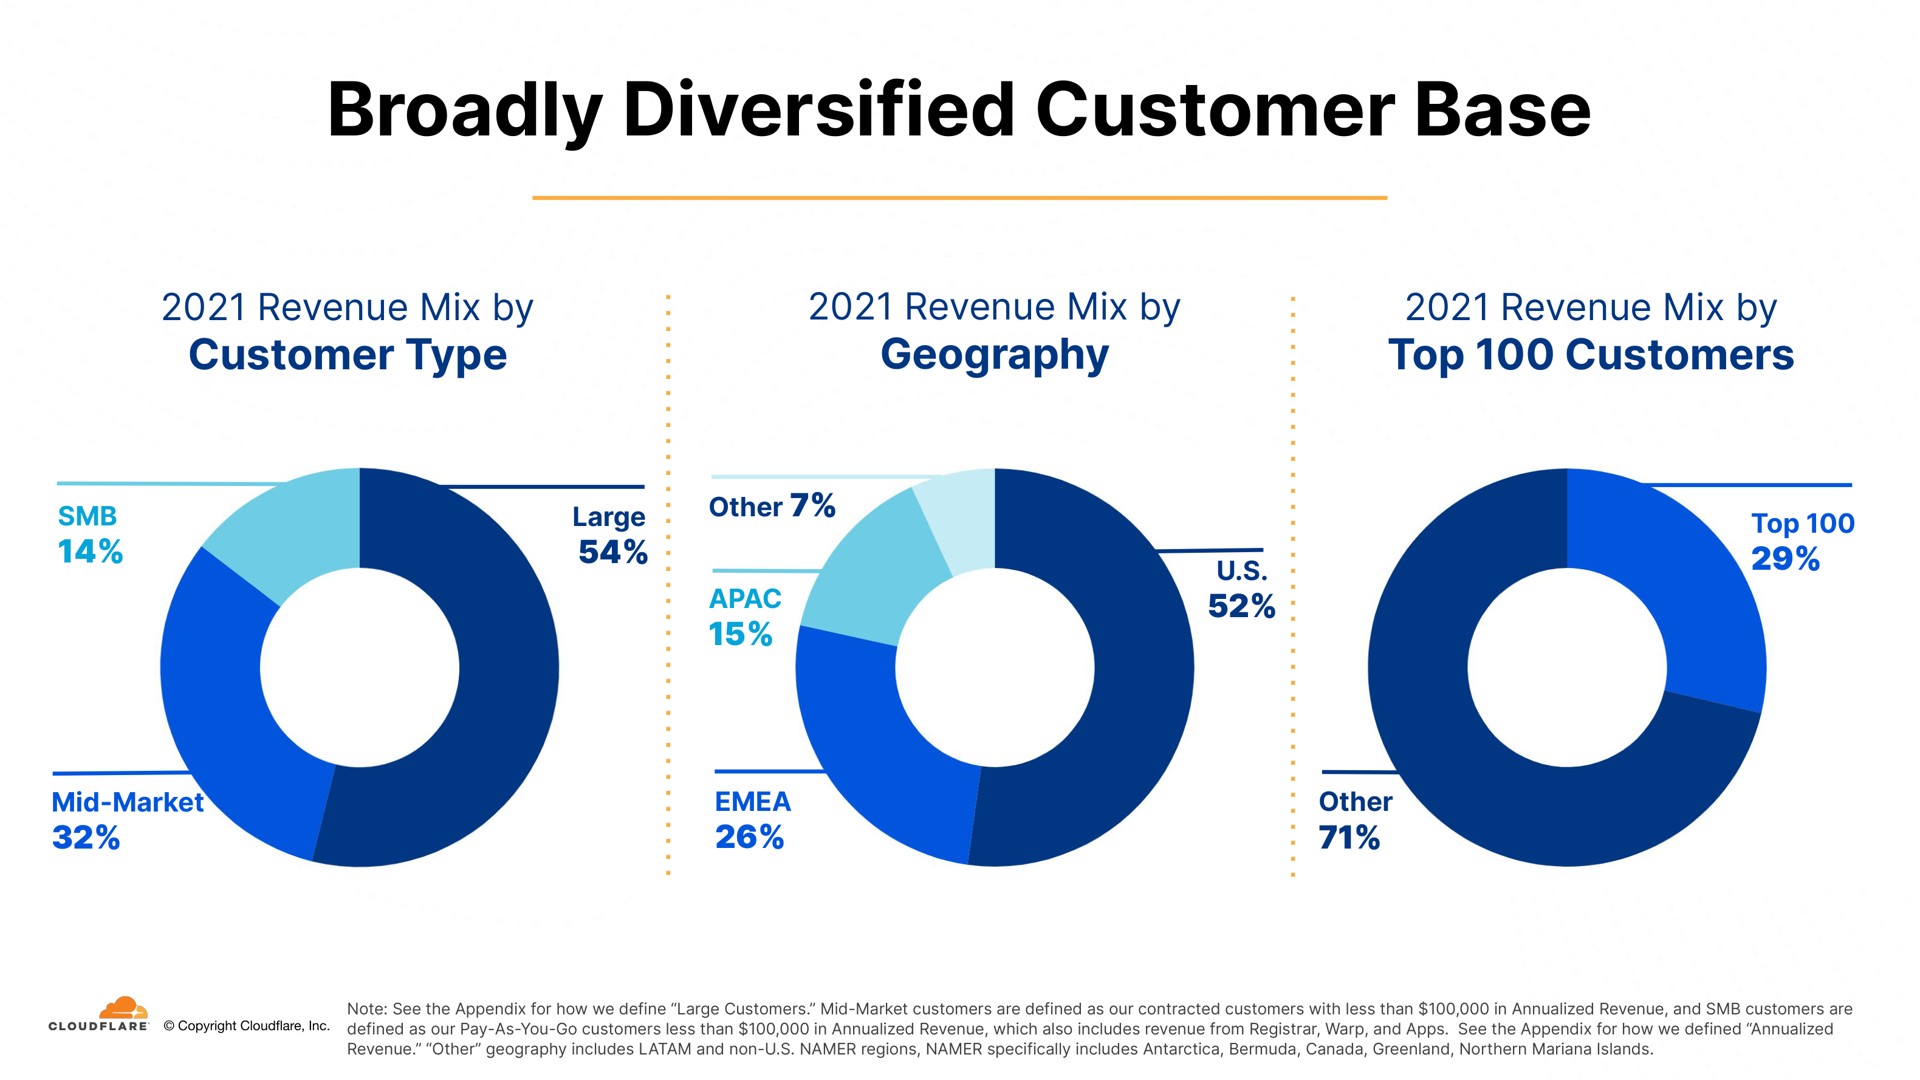 broadly diversified customer base type geography top customers | Cloudflare